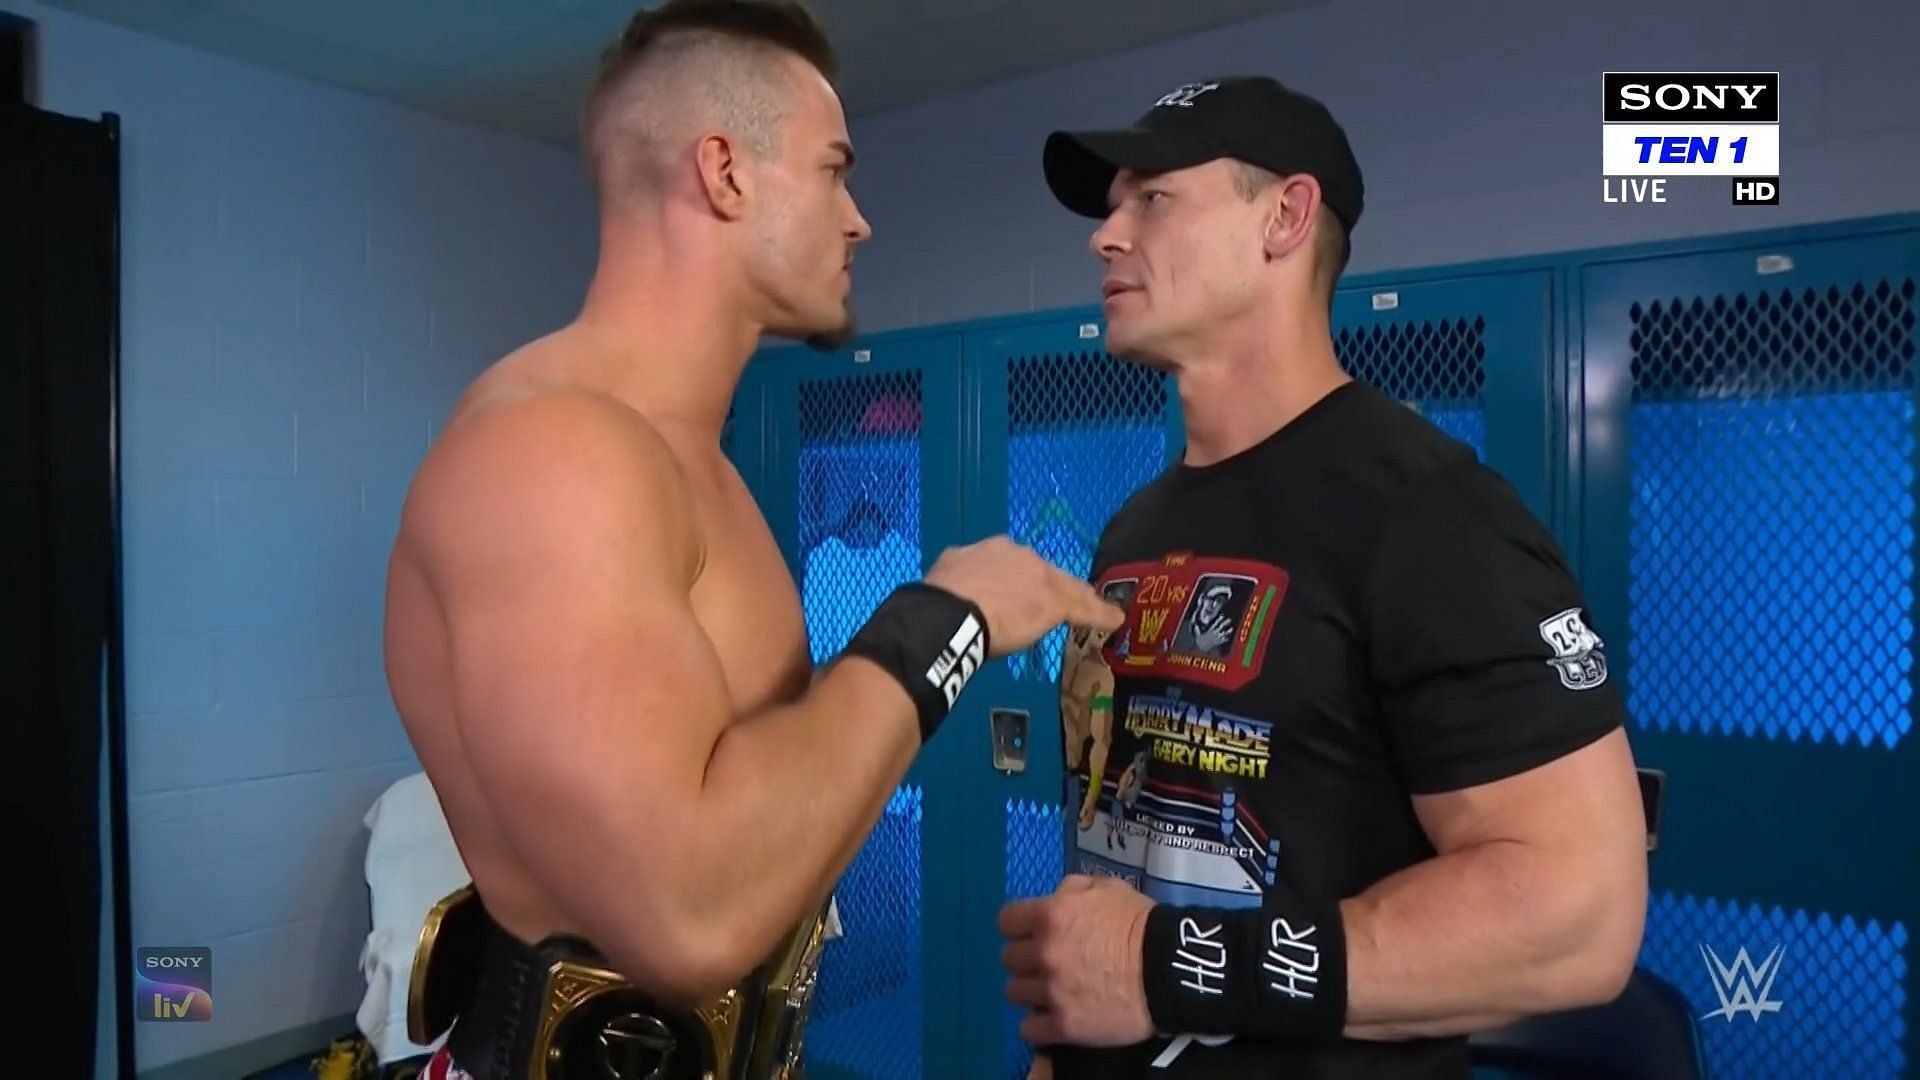 WWE has been teasing Theory vs. Cena for a while